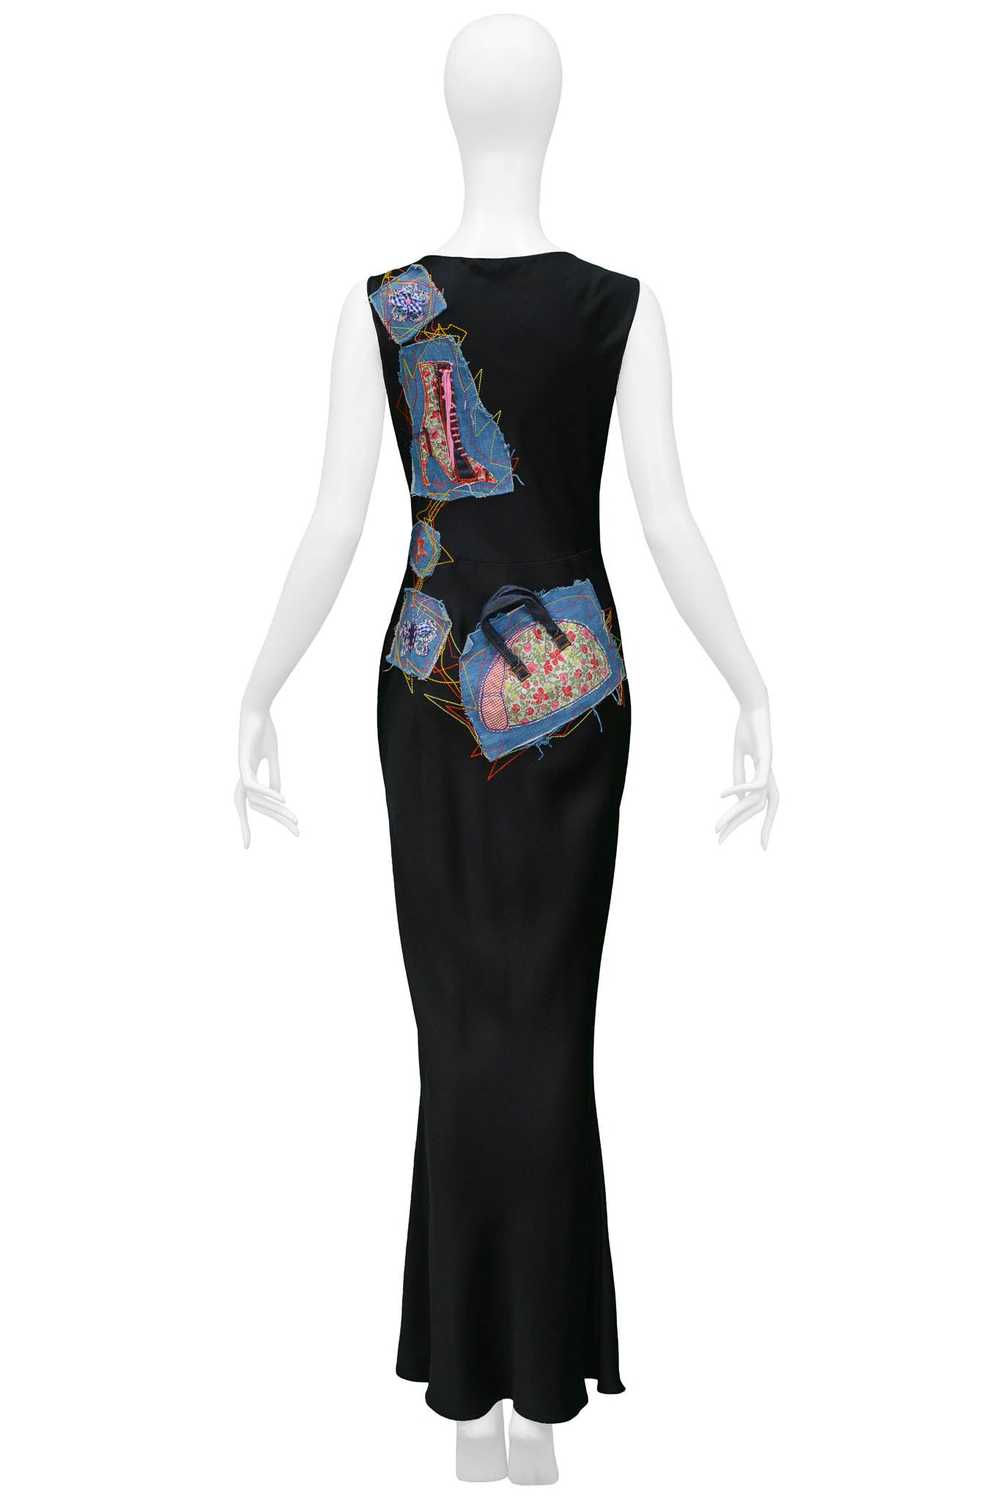 JOHN GALLIANO BLACK SATIN GOWN WITH PATCHWORK & E… - image 2